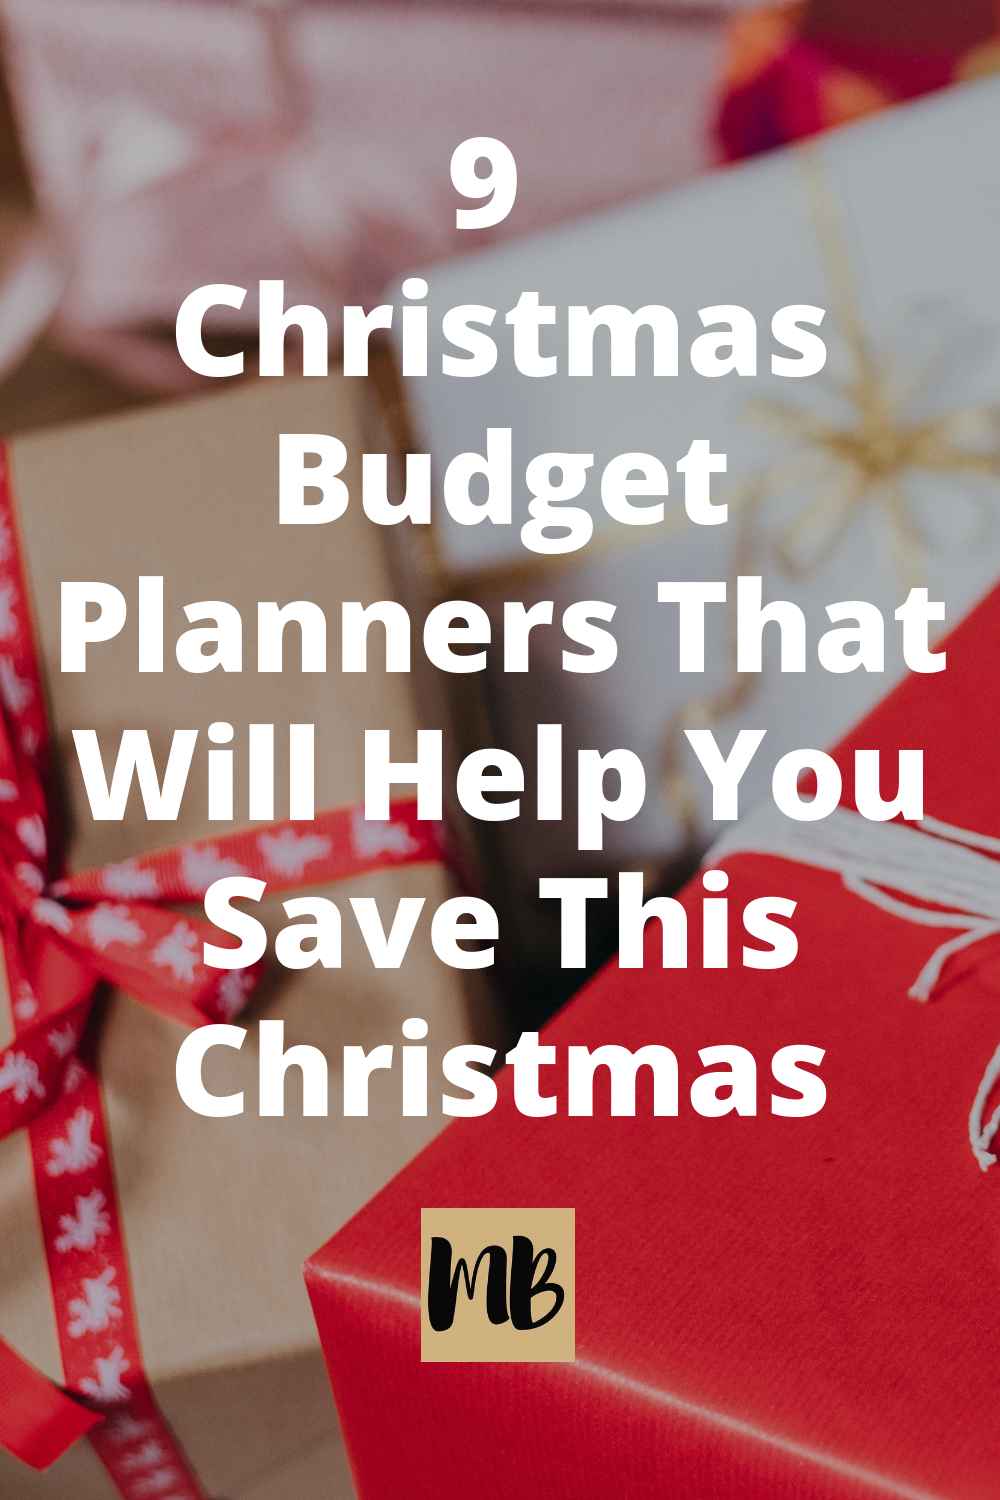 9 Christmas Budget Planners That Will Help You Save This